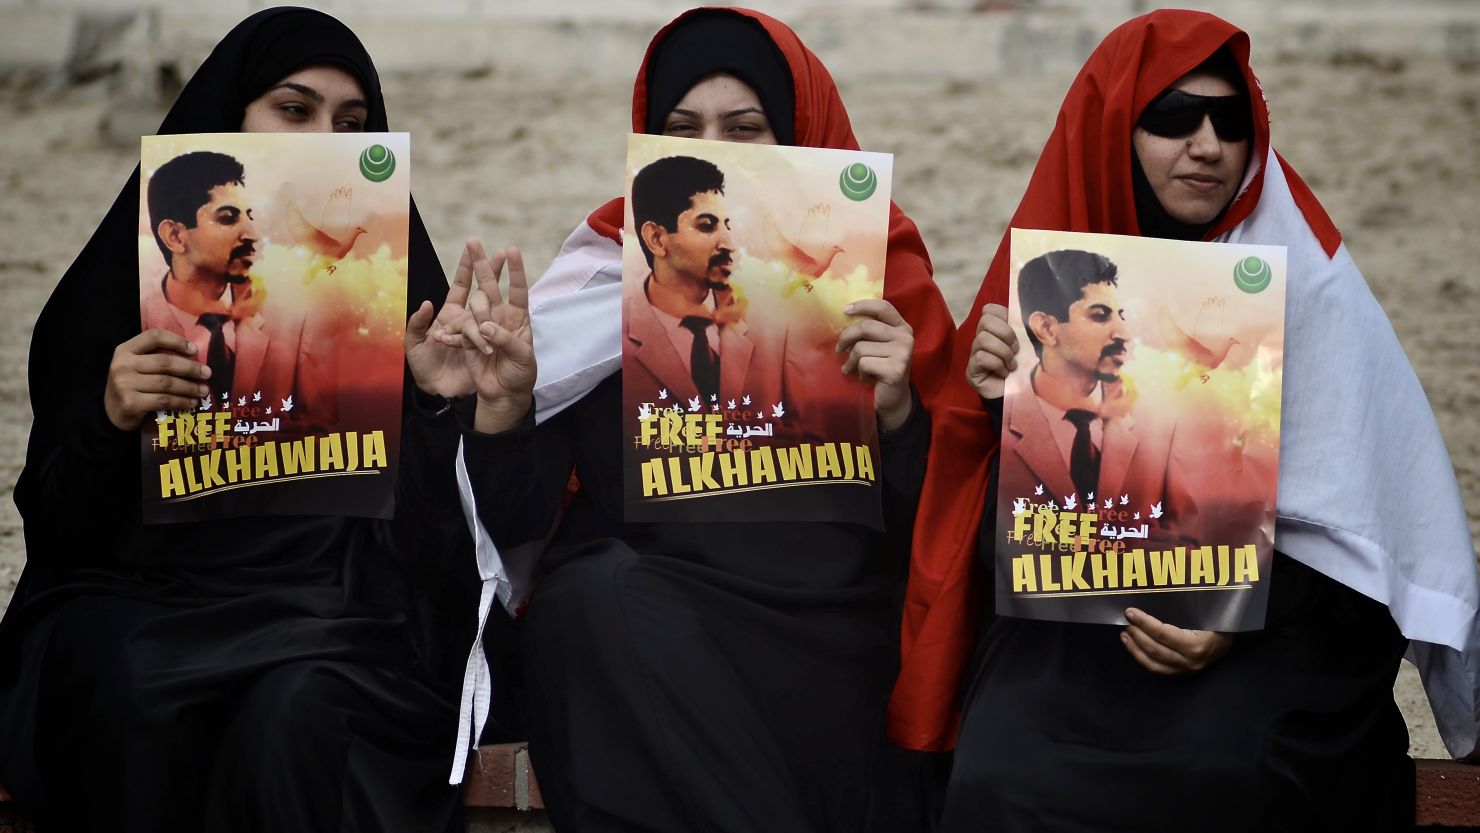 Bahraini demonstrators hold posters of Abdulhadi al-Khawaja during a protest calling for his release this month.